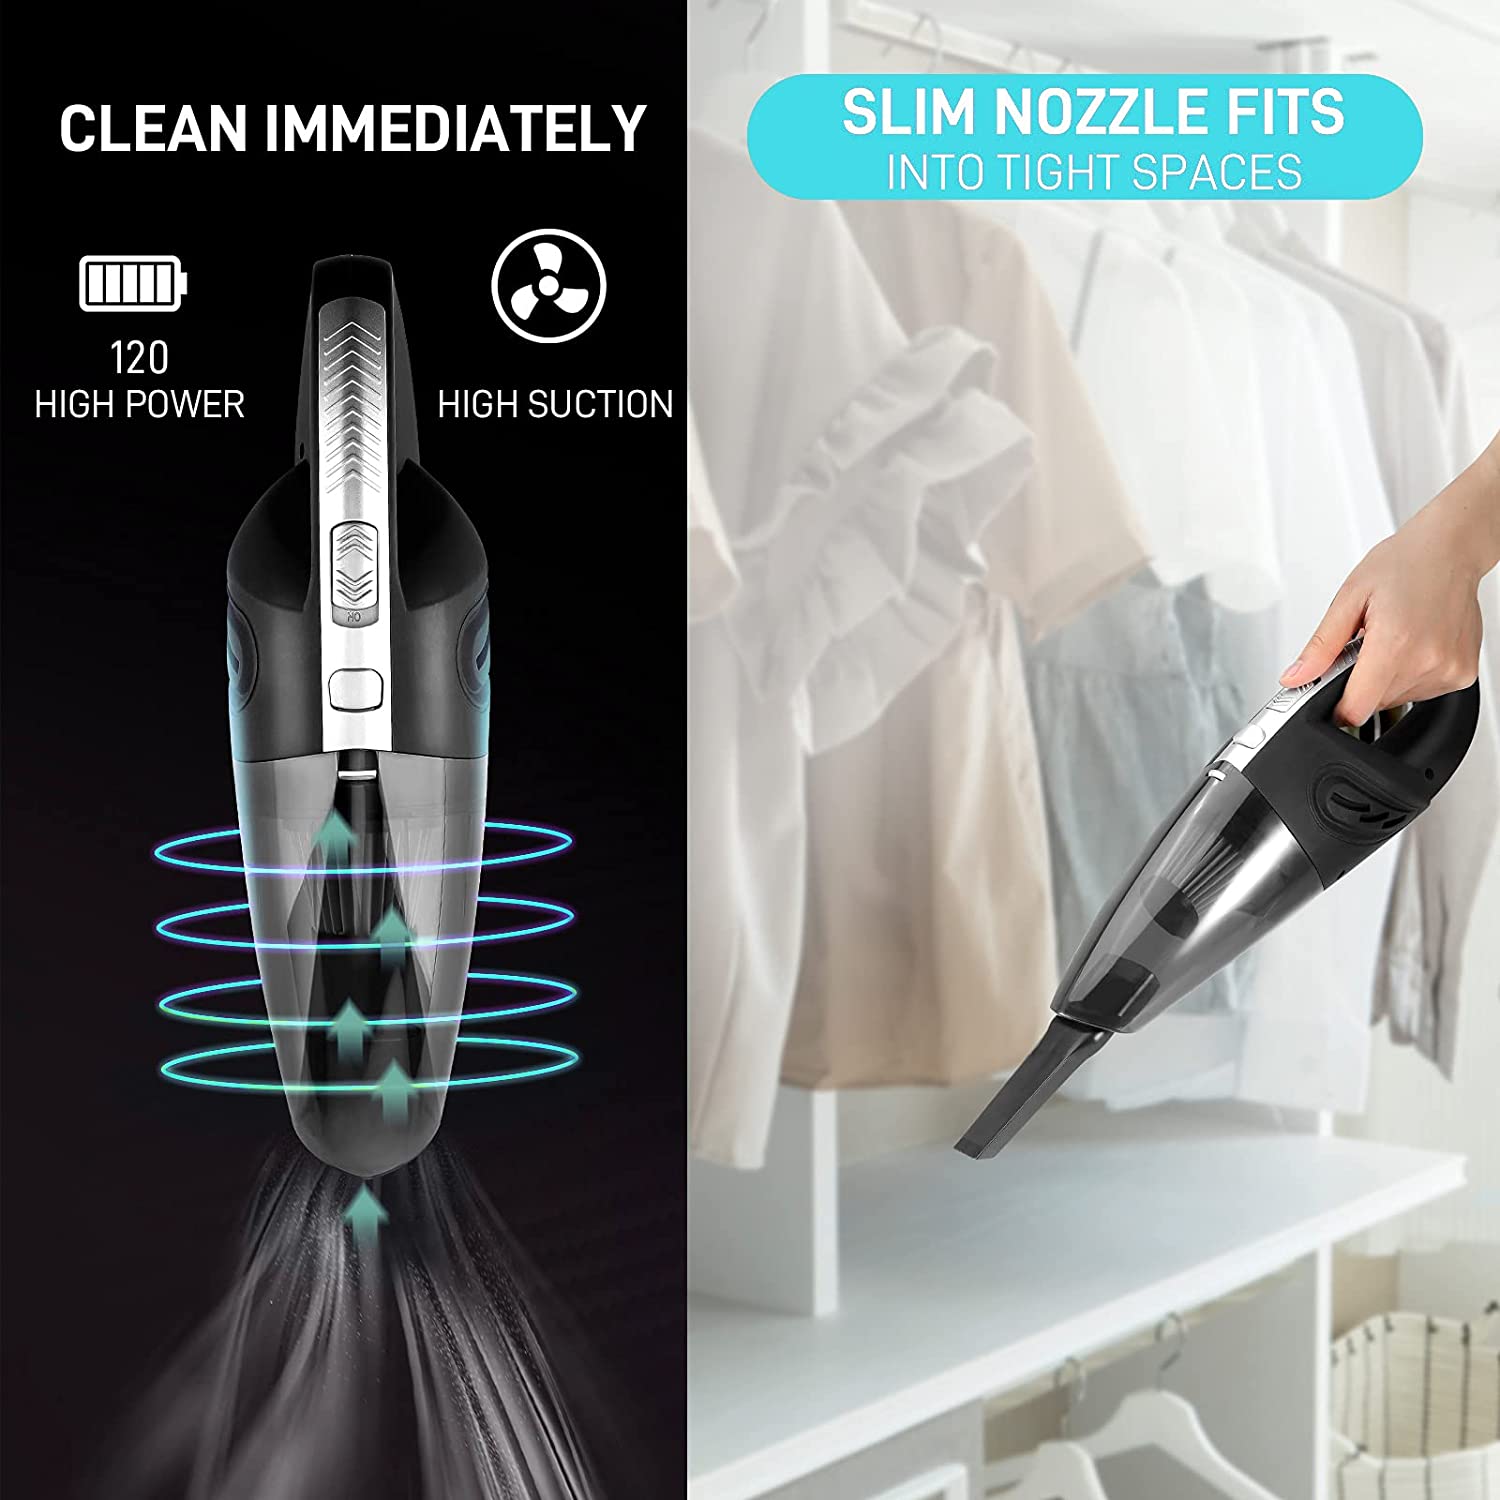 Handheld Vacuums Cordless Powered Battery Rechargeable Quick Charge Tech, Small and Portable Waterwashable Filter with Powerful Cyclonic Suction vacuums Cleaner for Home Office and Car Cleaning